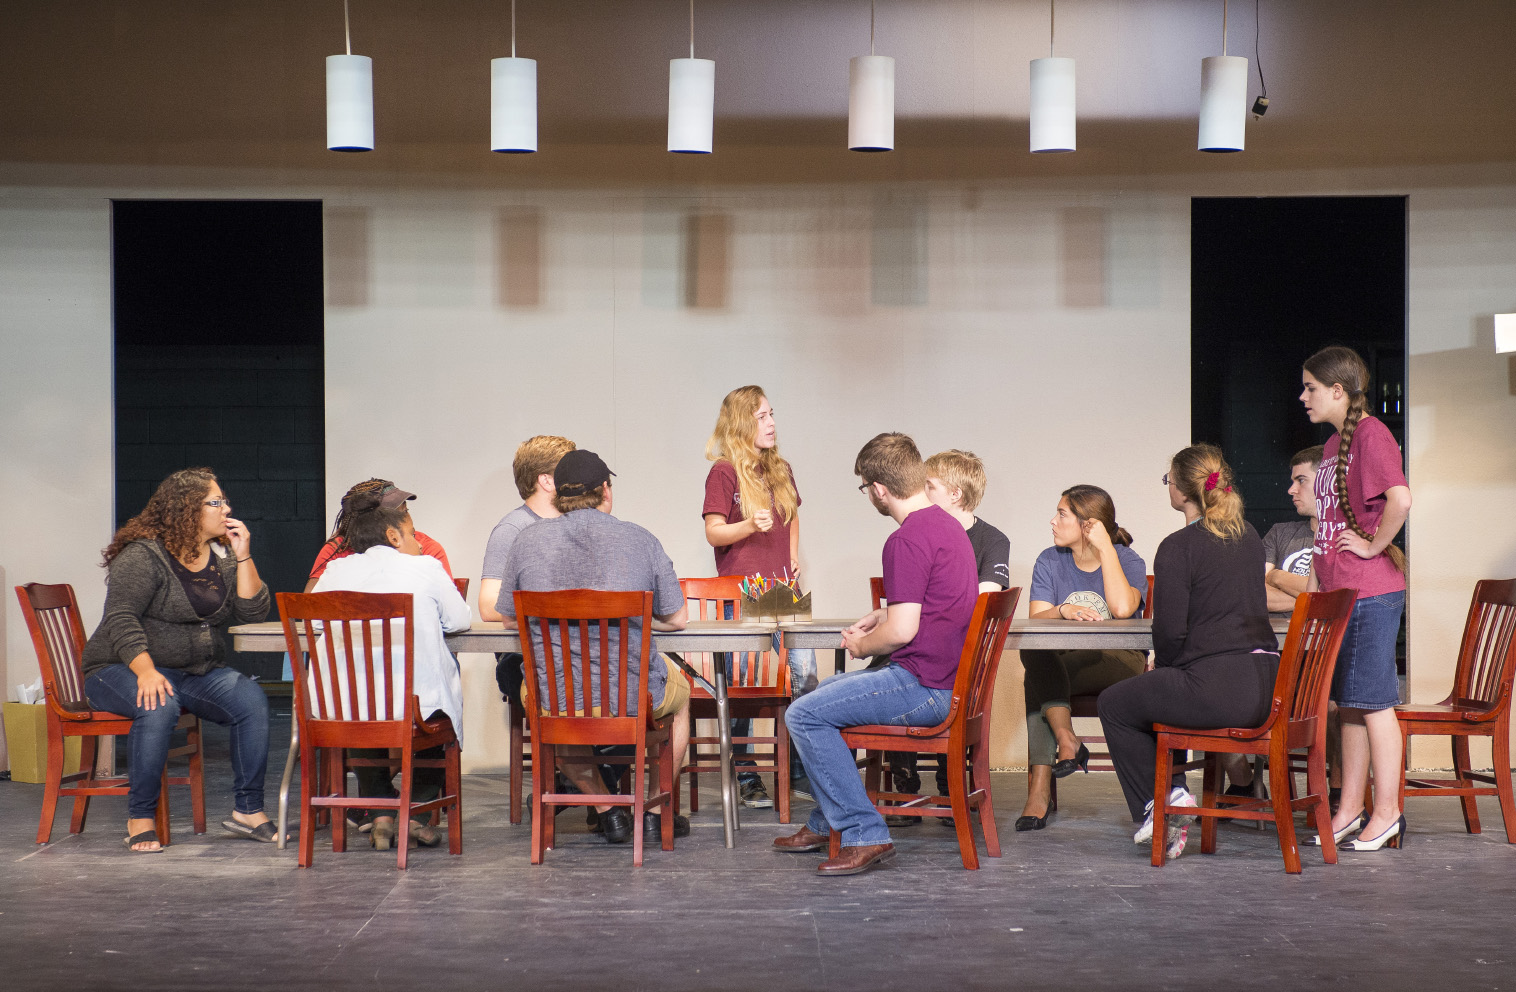 Cast members of 12 Angry Jurors debate the guilt or acquittal of a defendant based on reasonable doubt. The play opens at 7:30 p.m. Oct. 11 in Theatre Northwest (WTLO 1108).